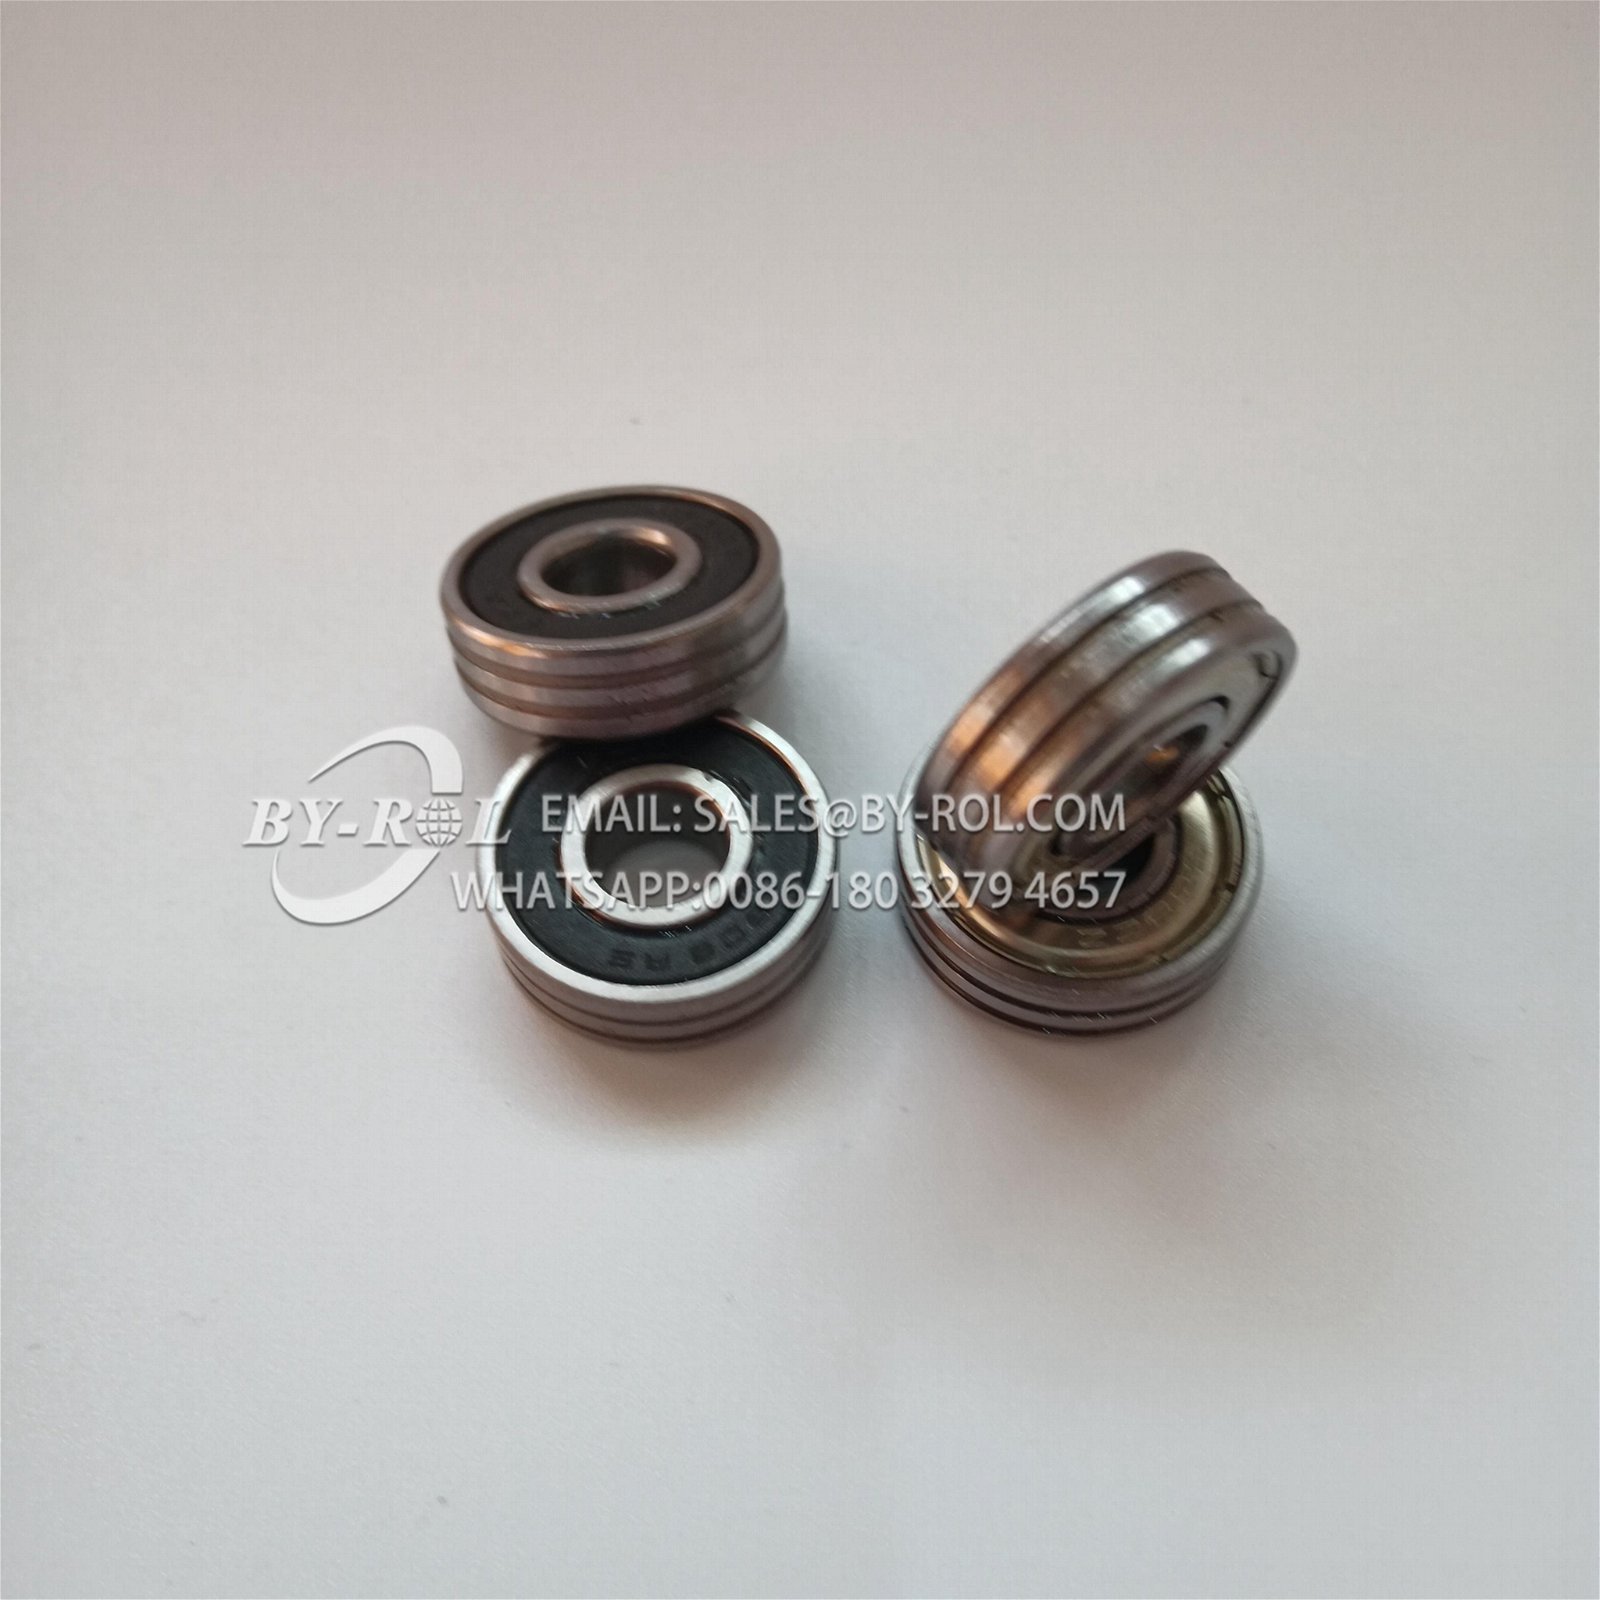 High quality and Durable z809 ball bearing Miniature Bearing for industrial use  2